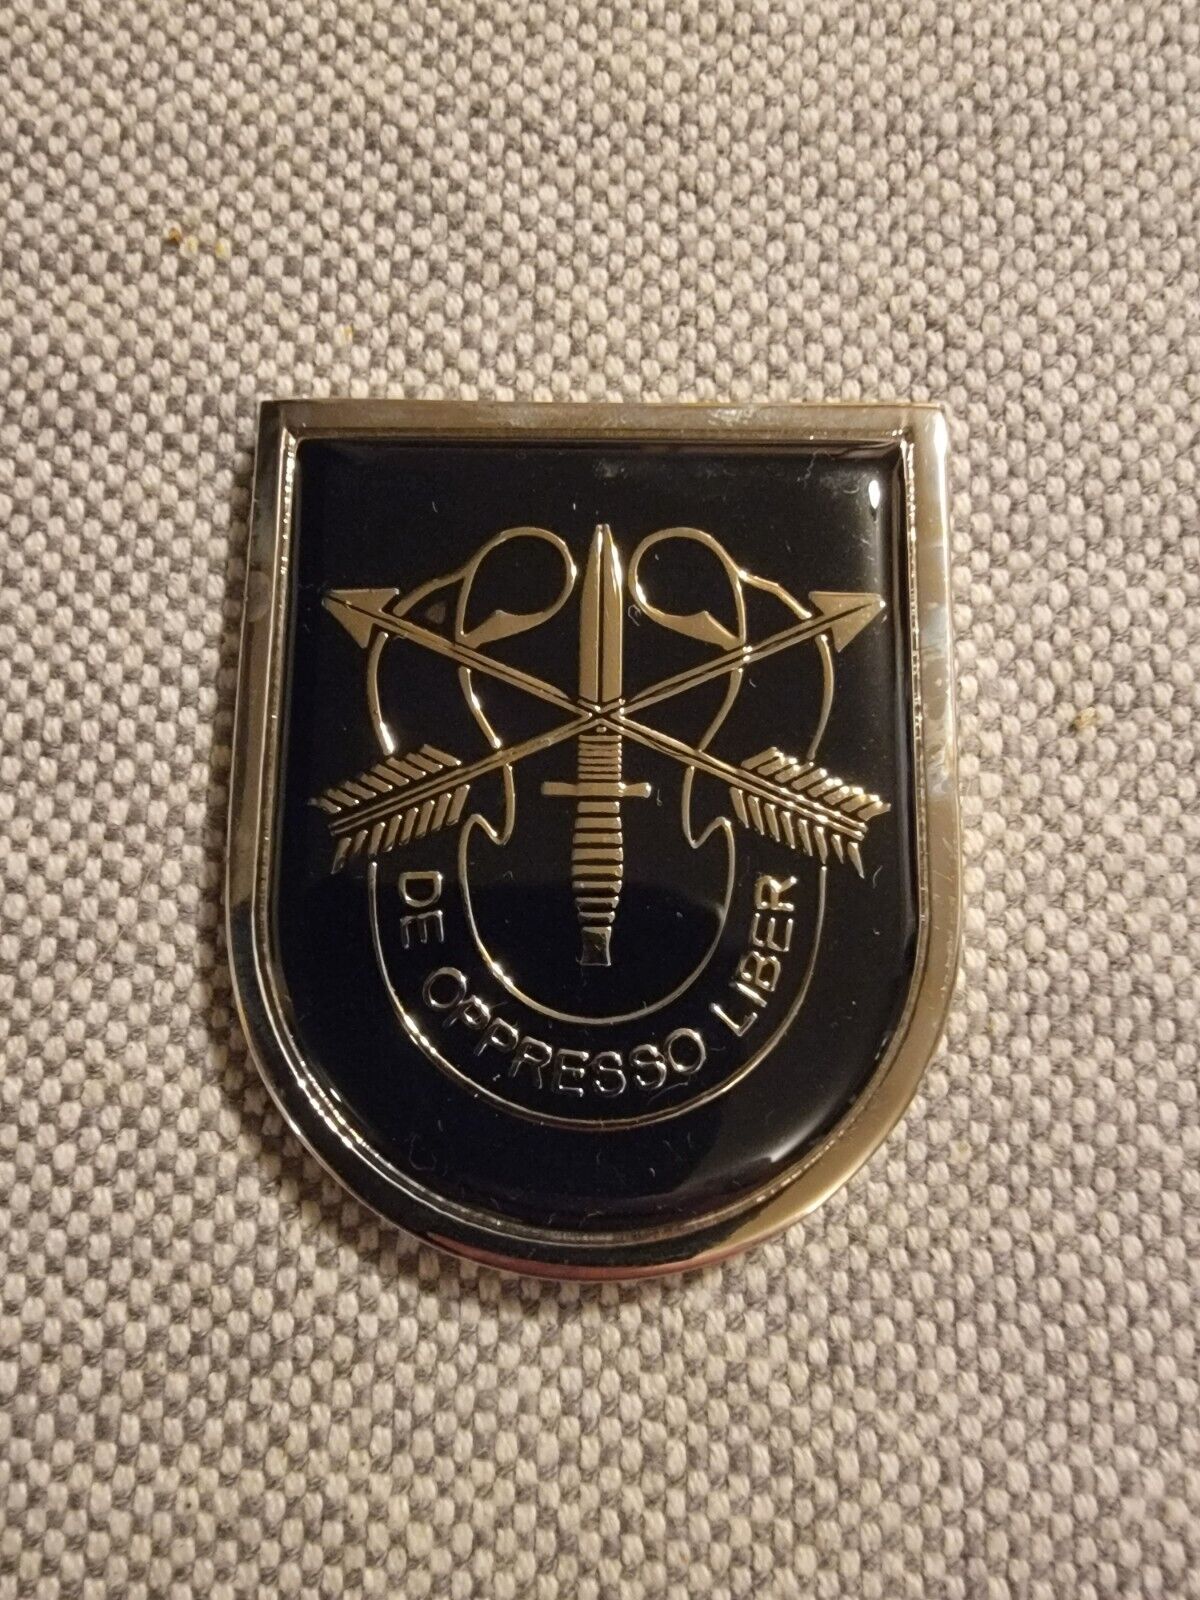 5TH SPECIAL FORCES GROUP 1ST BATTALION US ARMY CHALLENGE COIN